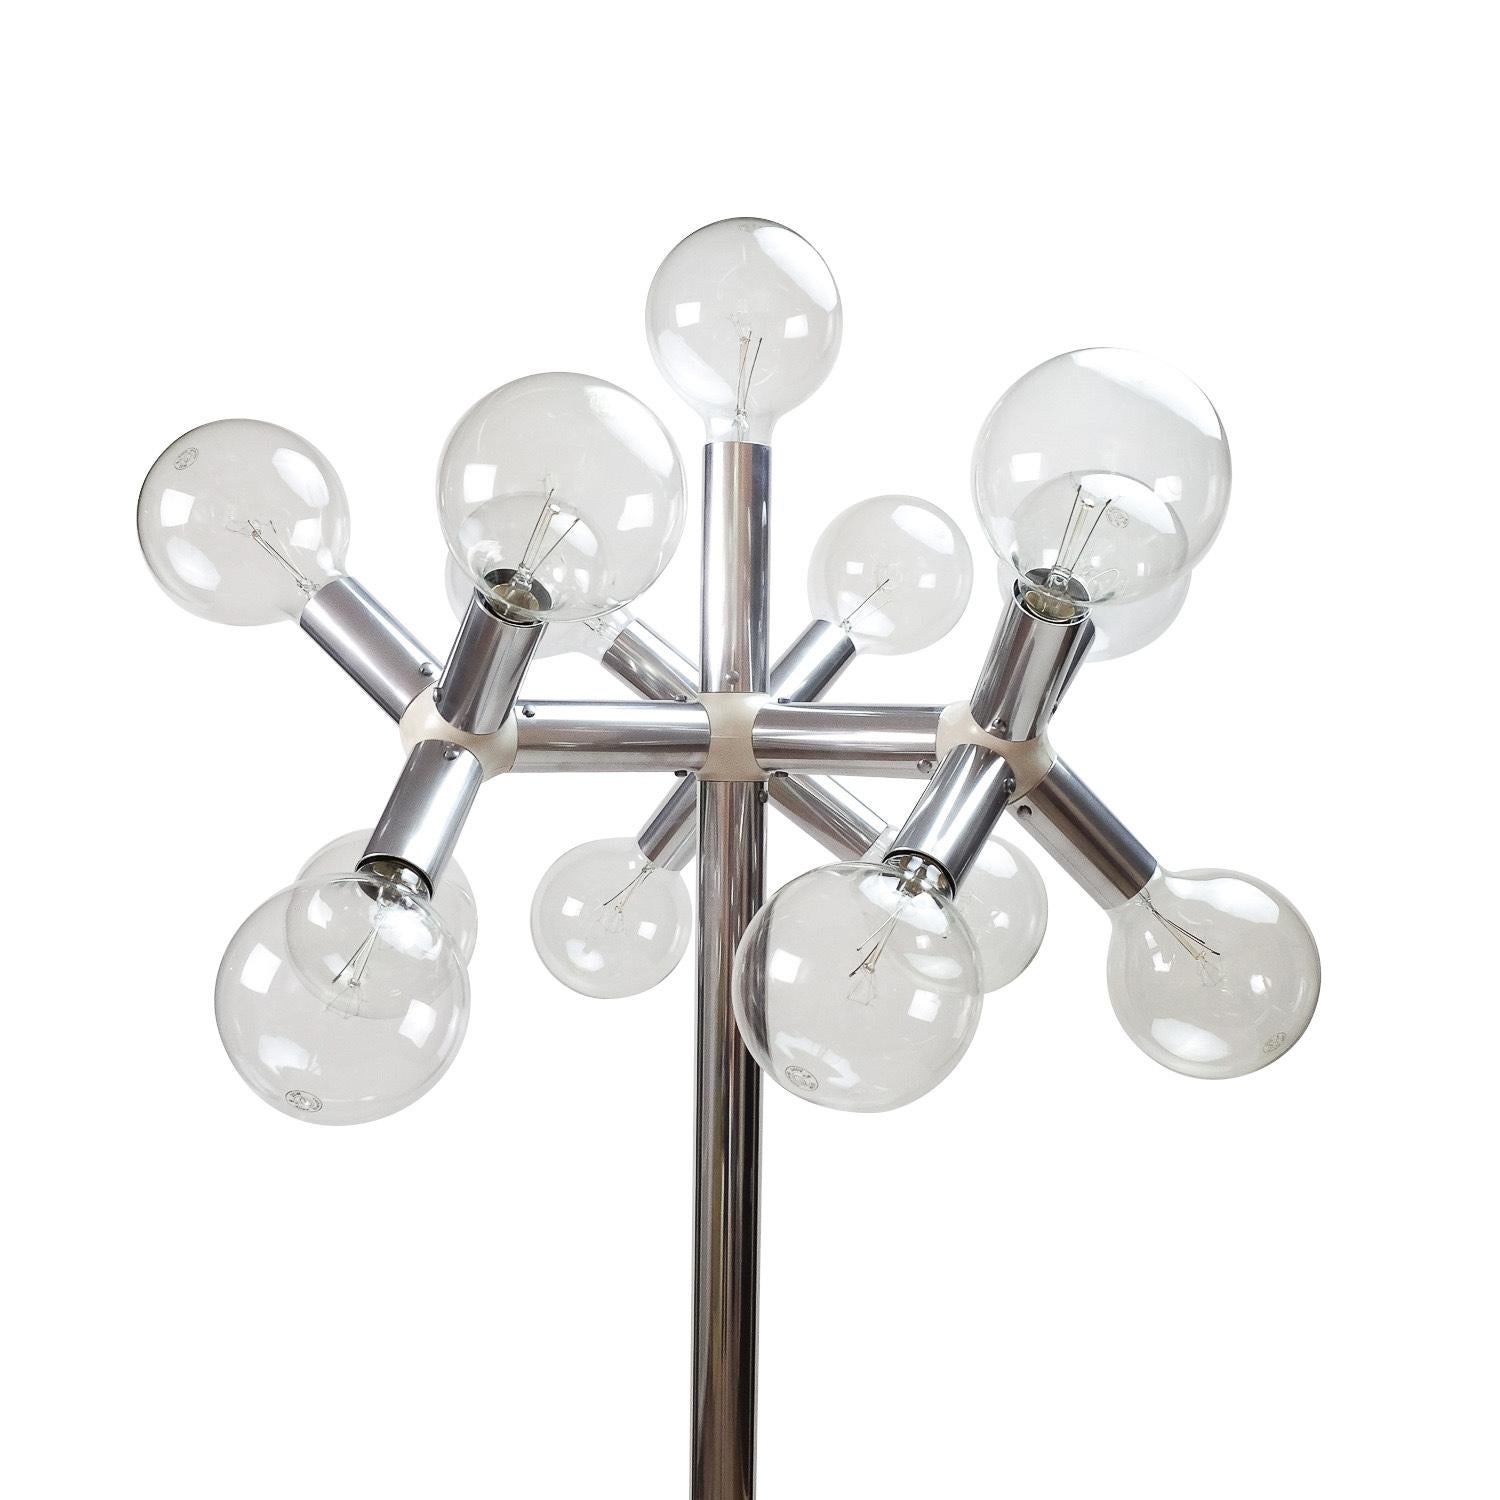 Aluminum “Atomic” floorlamp designed by Trix and Robert Haussmann in the 1960s, and produced by Swisslamps International.

The lamp is made of aluminum and connecting plastic tubes, and features 14 125mm globe lightbulbs (included).

Overall in